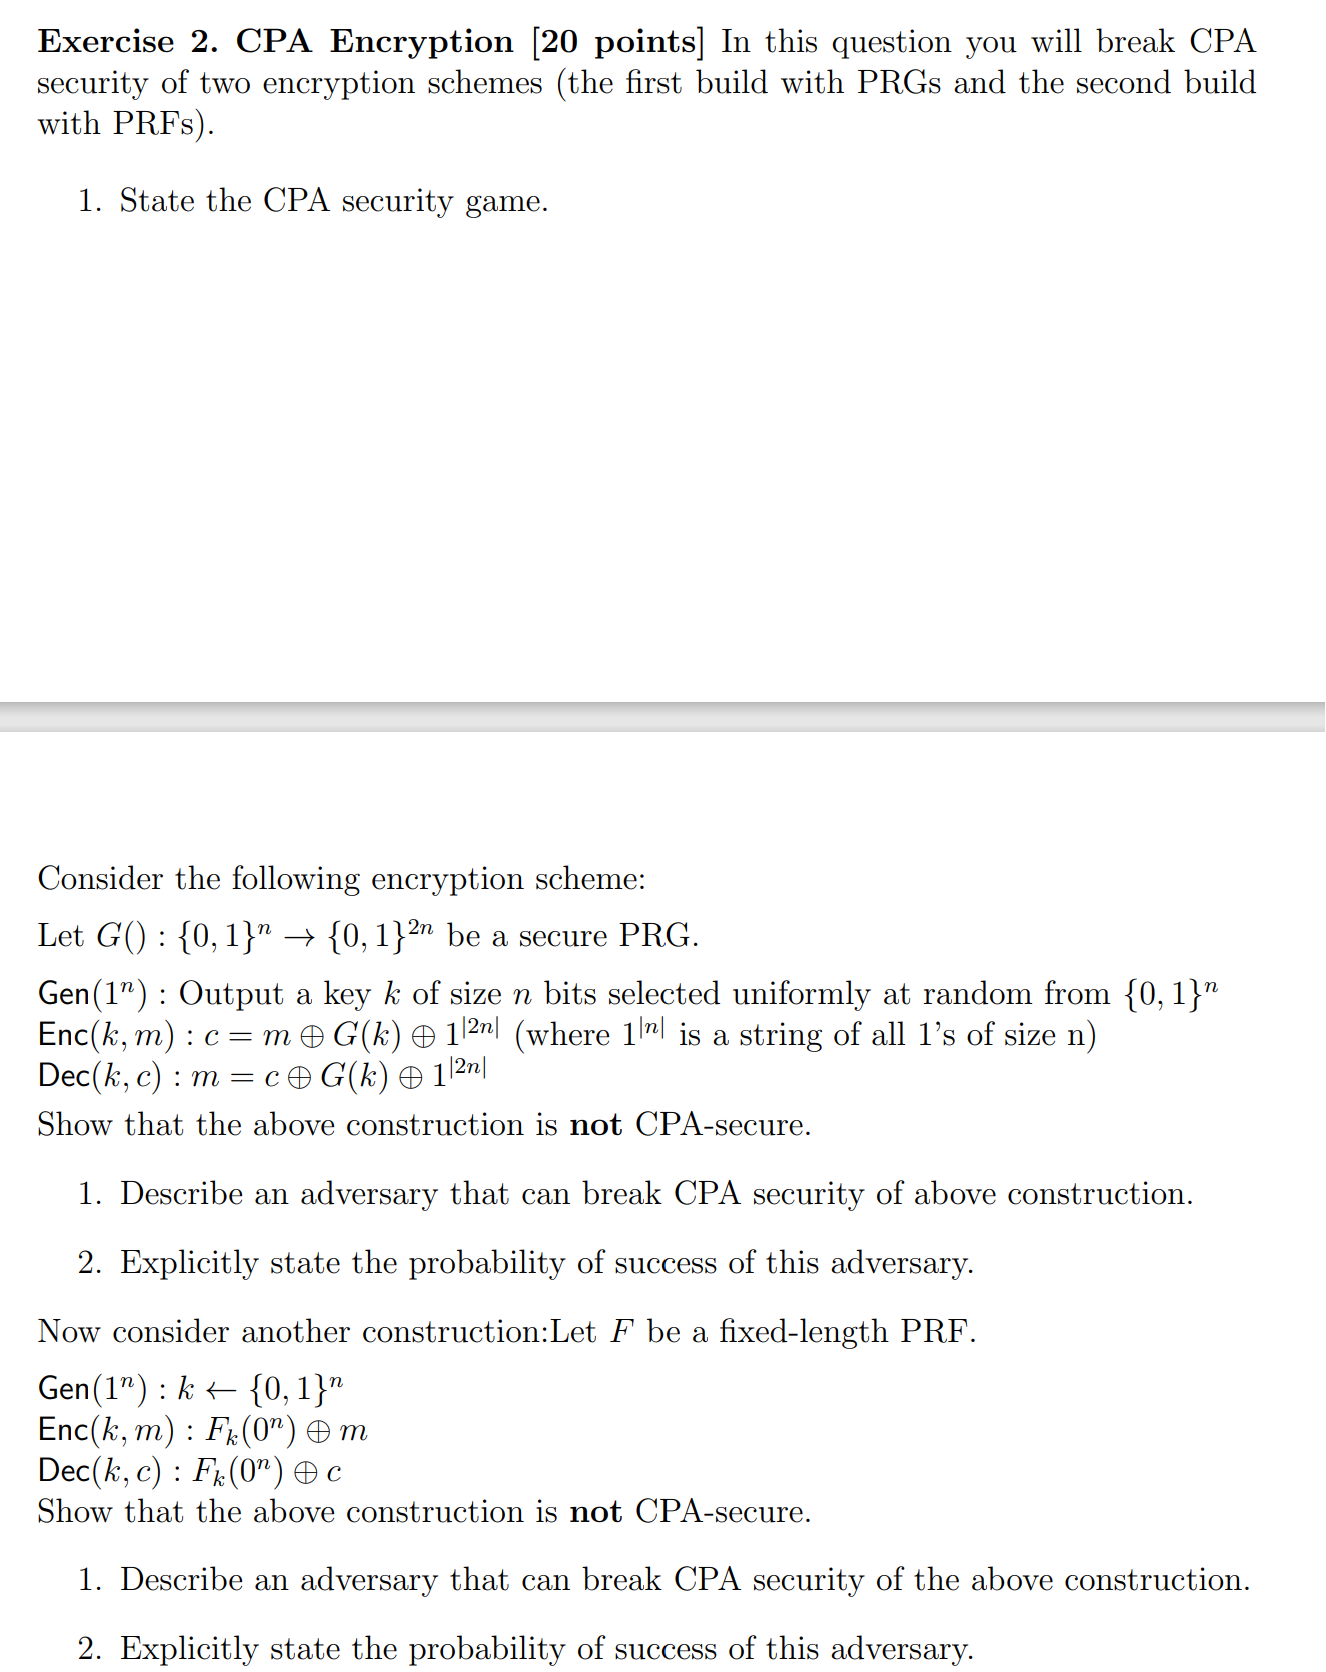 Exercise 2. CPA Encryption [20 points] In this question you will break CPA security of two encryption schemes